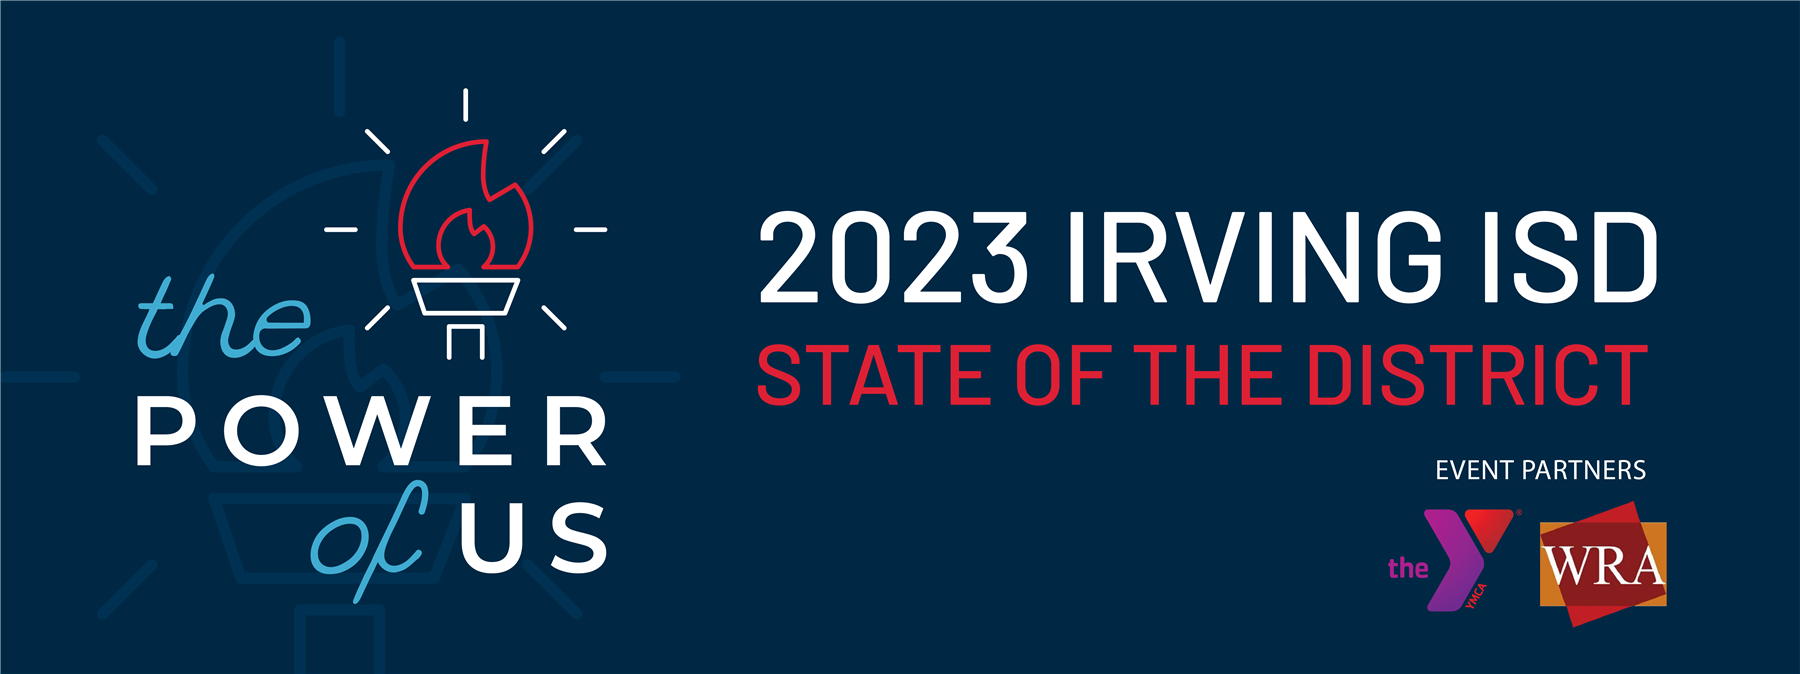 2023 Irving ISD State of the District